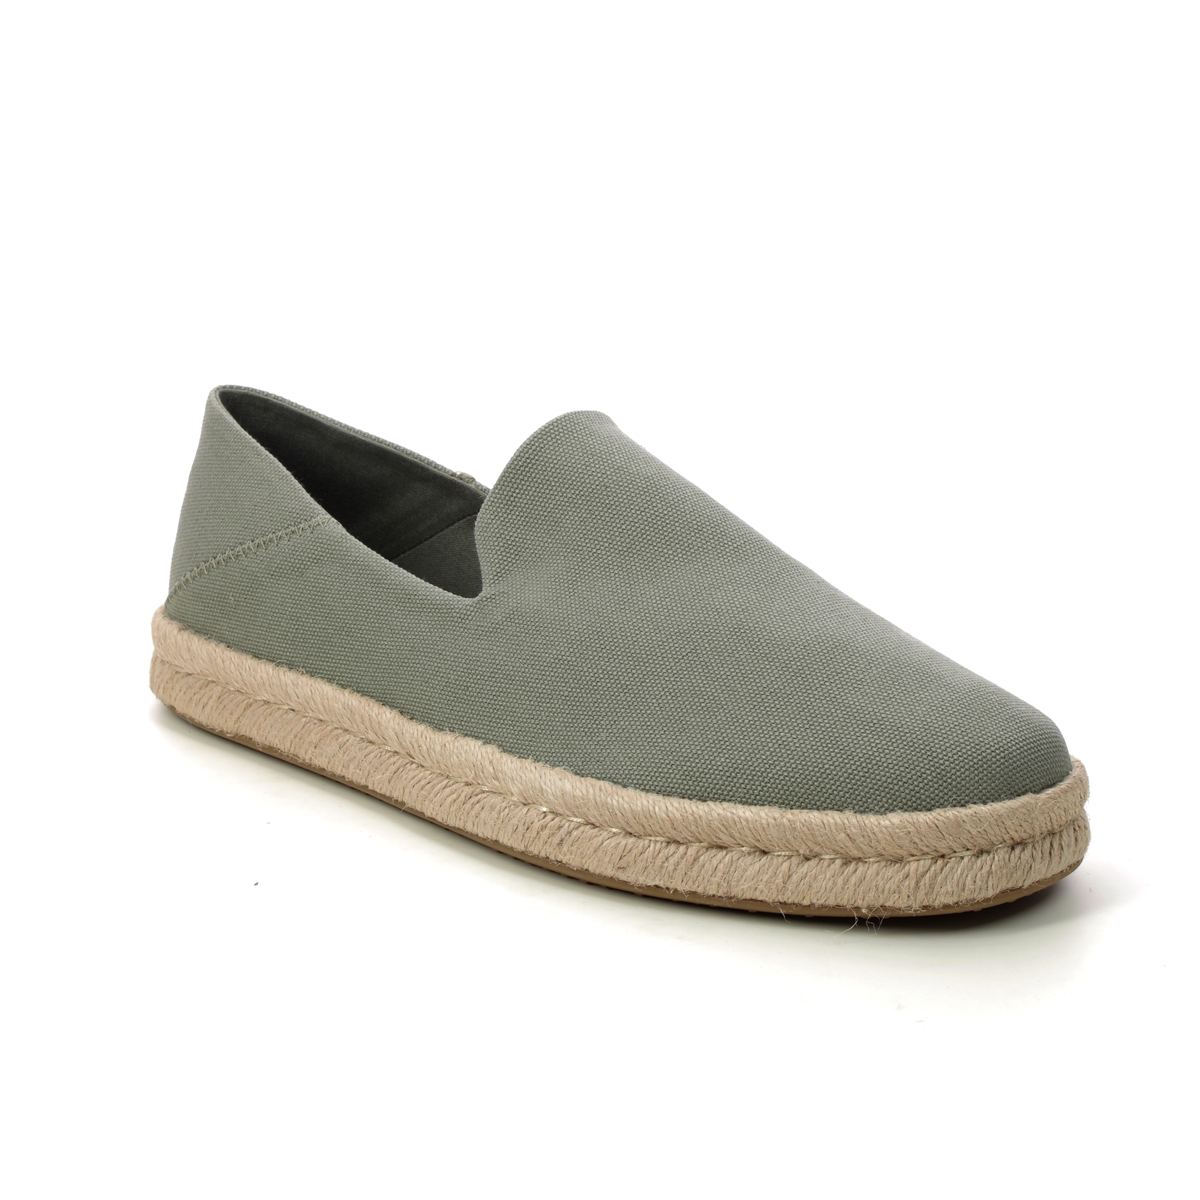 Toms Santiago Alp 2 Sage green Mens Closed Toe Sandals 10020071-90 in a Plain Canvas in Size 10